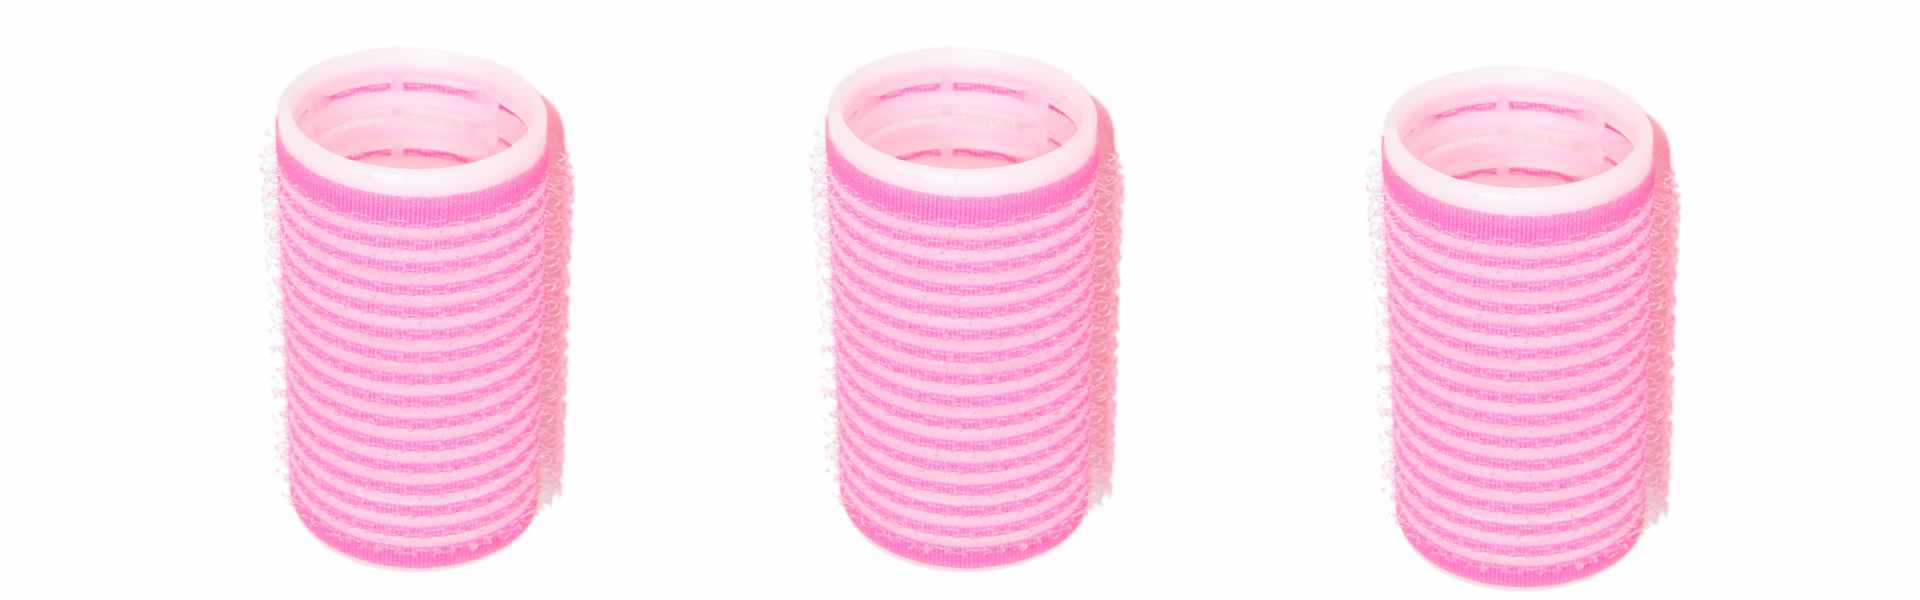 3 pink velcro rollers for styling hair and creating volume at the crown